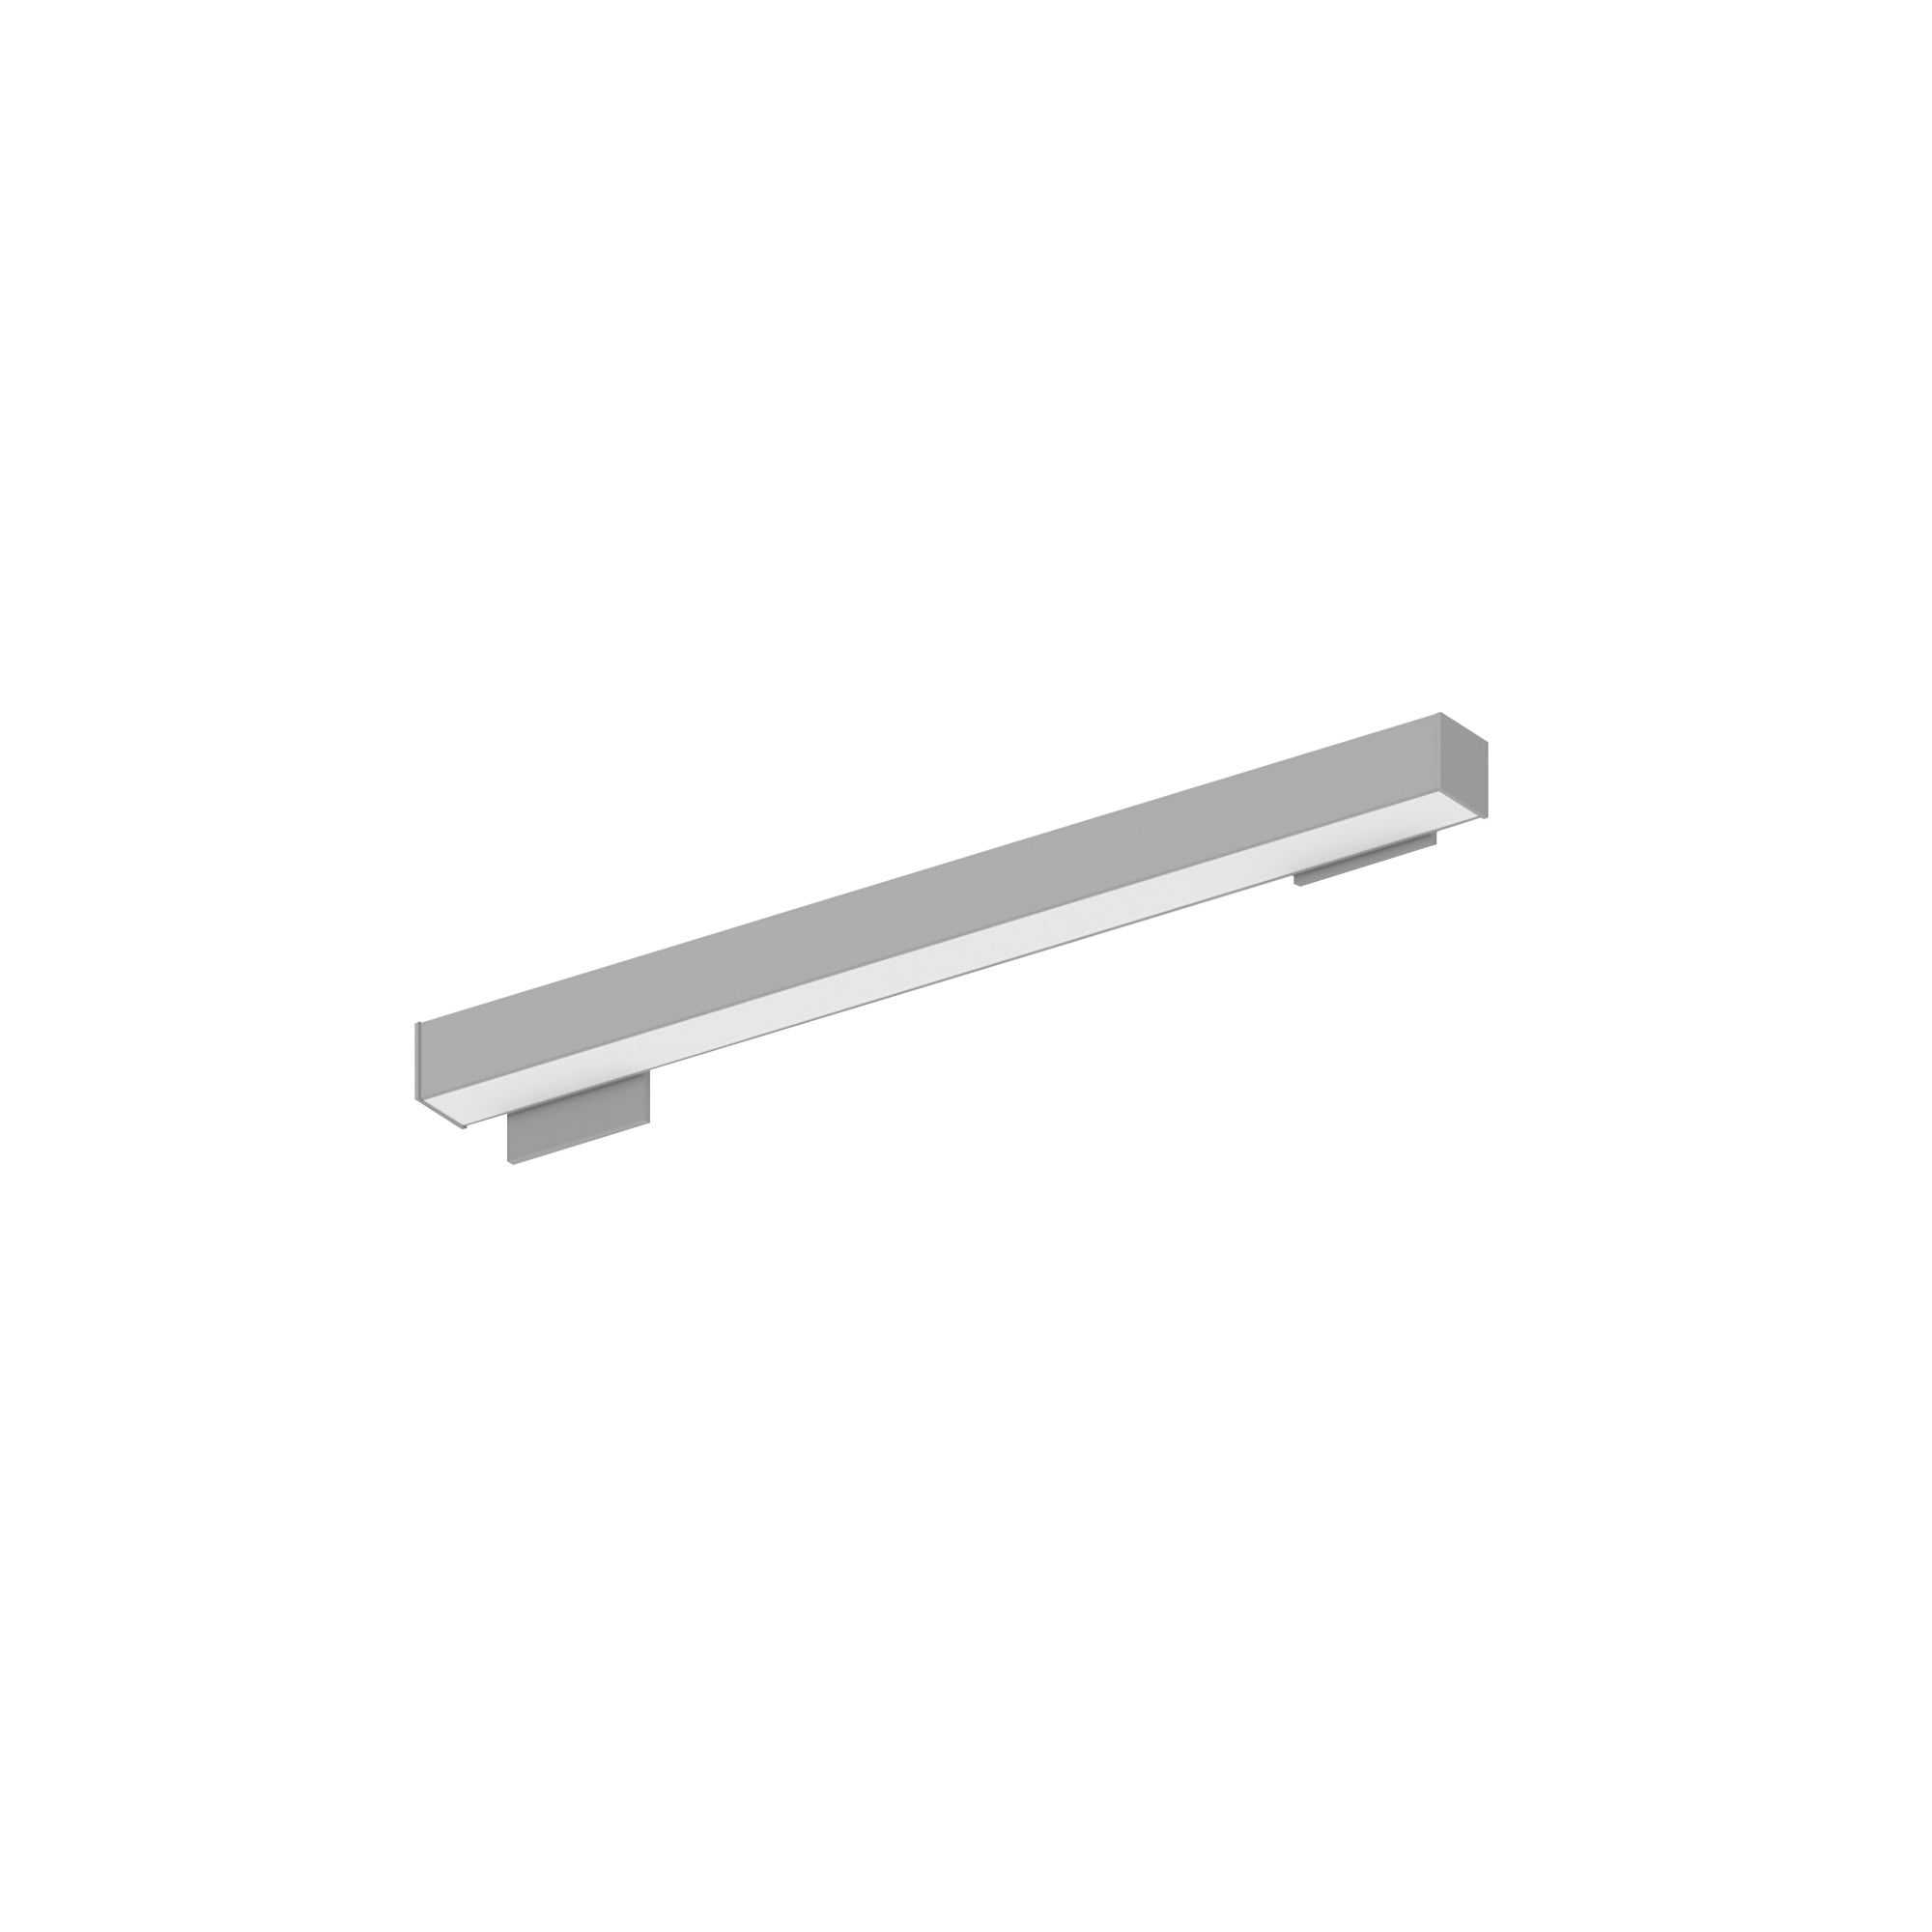 Nora Lighting NWLIN-21040A/L4-R2P - Linear - 2' L-Line LED Wall Mount Linear, 2100lm / 4000K, 4 Inchx4 Inch Left Plate & 2 Inchx4 Inch Right Plate, Right Power Feed, Aluminum Finish